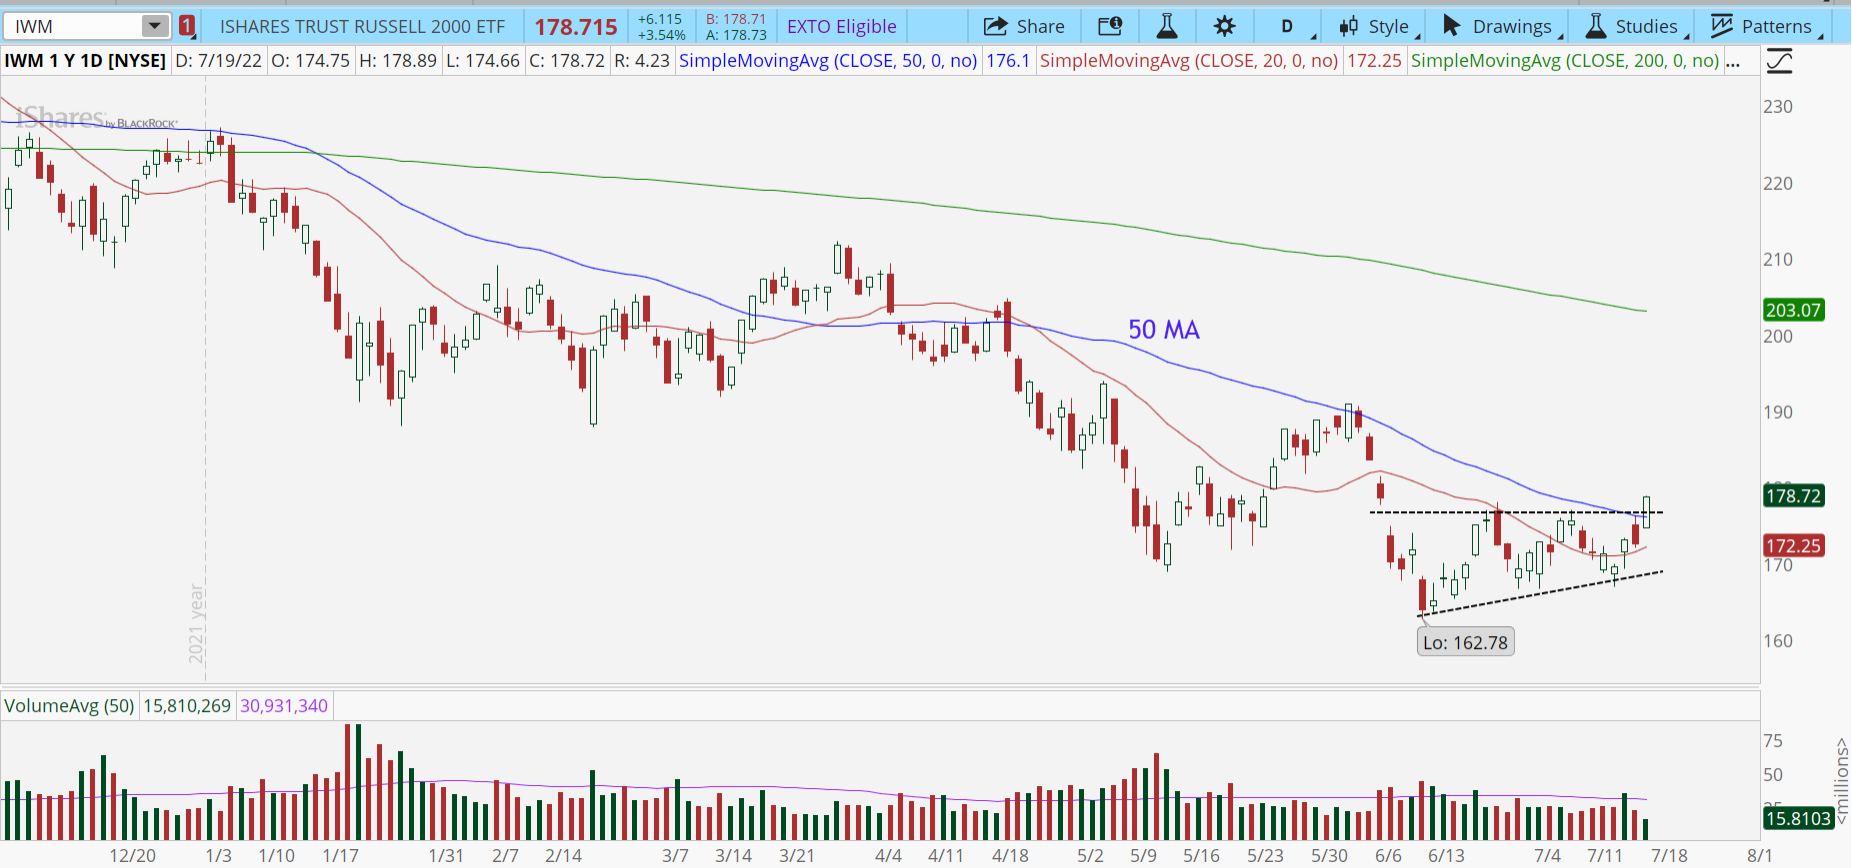 Chart of the Day: Russell 2000 ETF ($IWM)